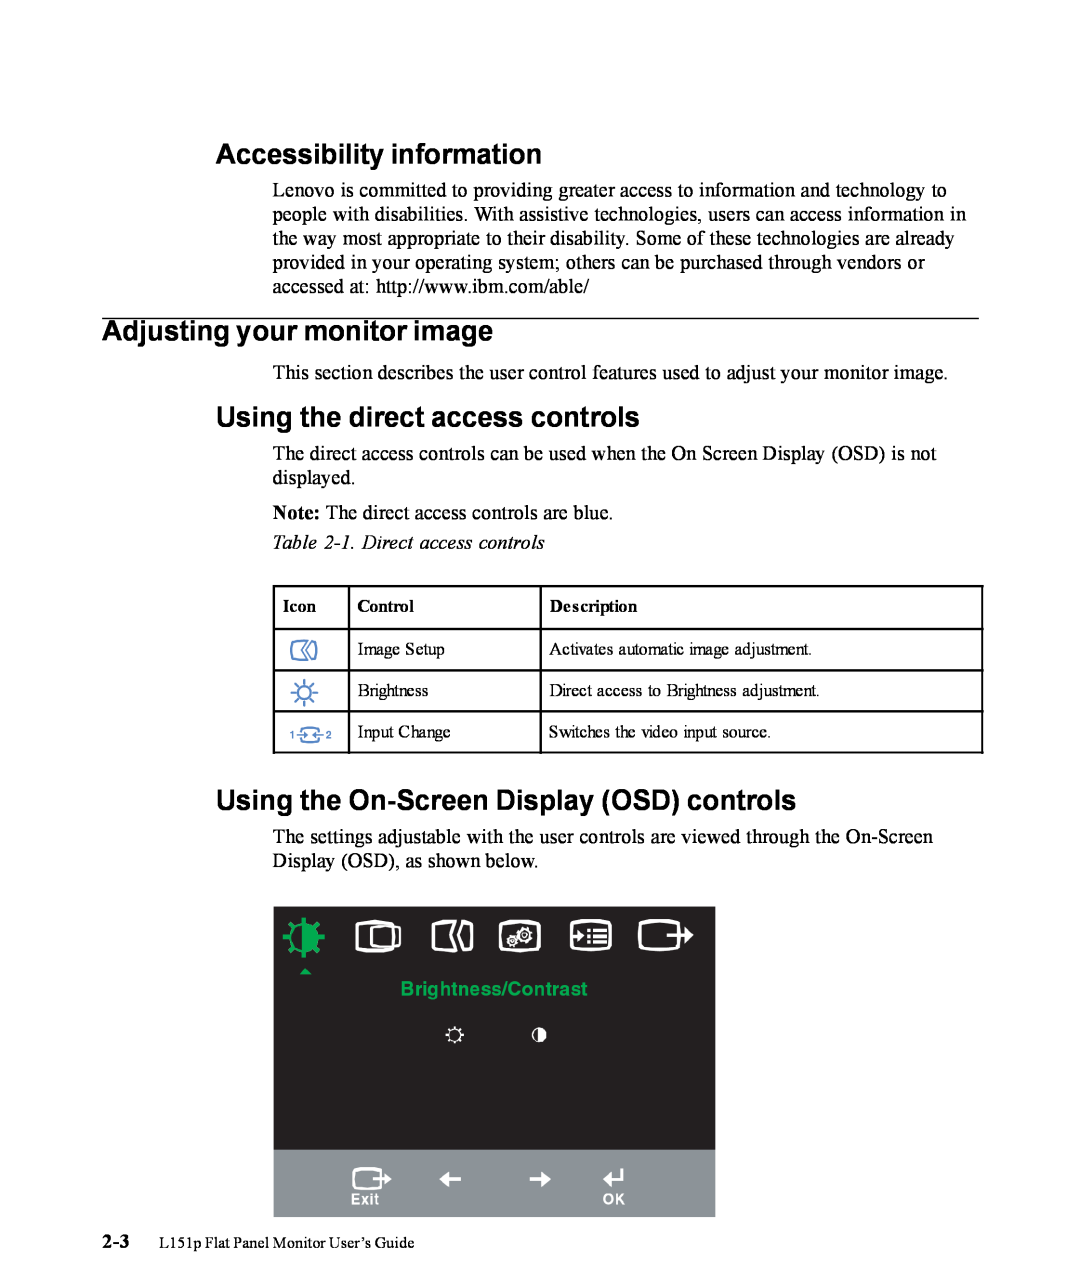 Lenovo 9205-HG2 manual Accessibility information, Adjusting your monitor image, Using the direct access controls 